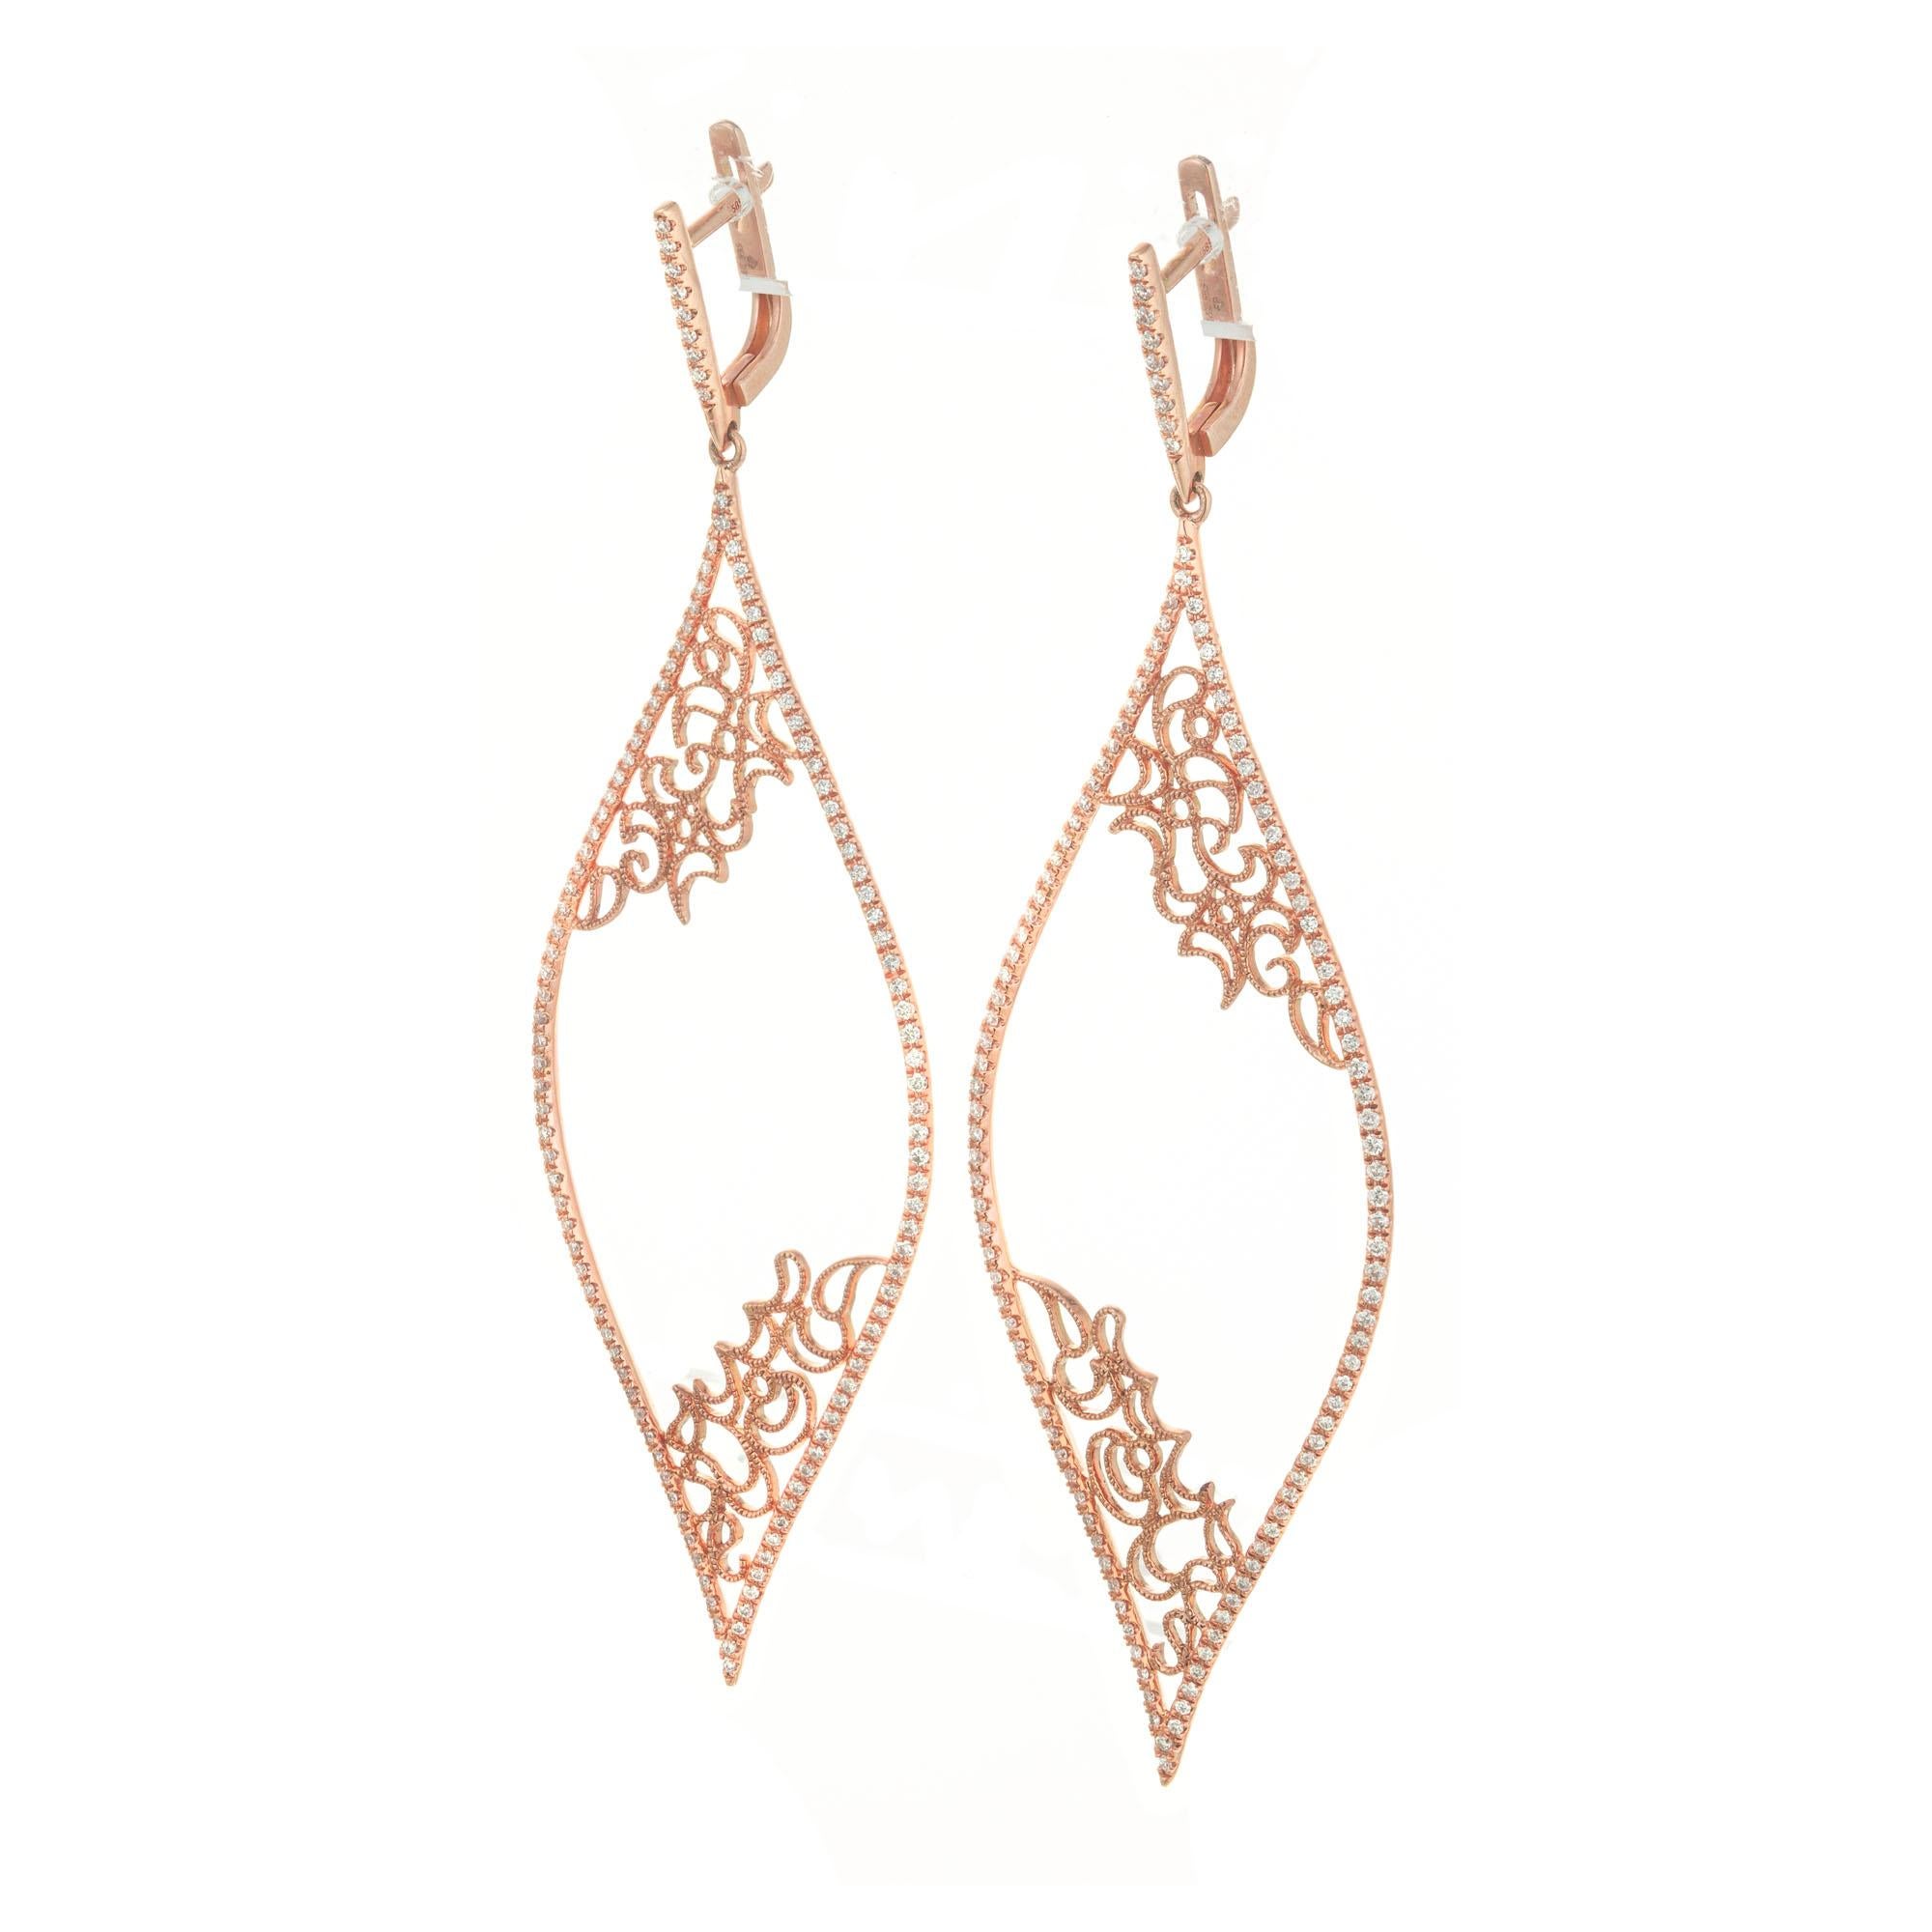 Micro Pave set diamond dangle chandelier earrings in 14k rose gold. 238 round single cut diamonds set in 14k rose gold settings. Signed GB 14k 585. Post and hinge tops. On Peter's now famous pink gold scale of 1 to 10 with 10 as the deepest pink